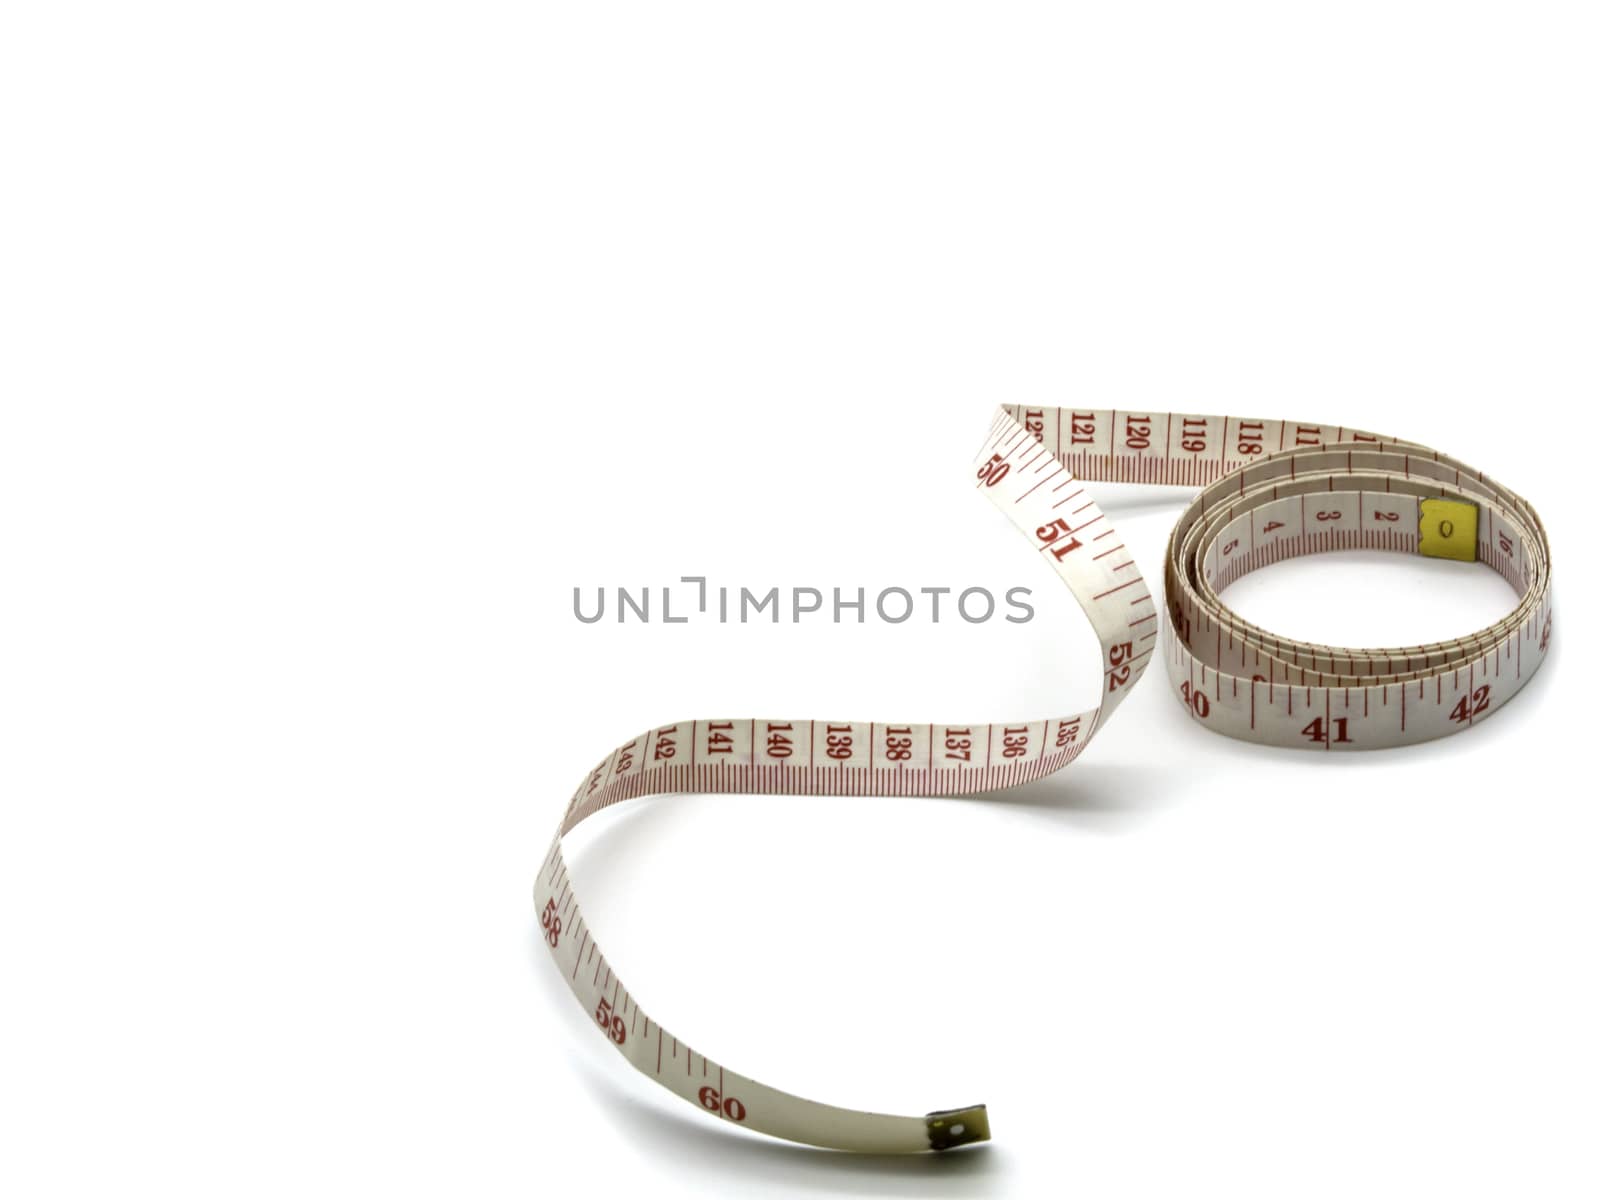 A soft tailor measuring tape isolated on a white background with copy space.